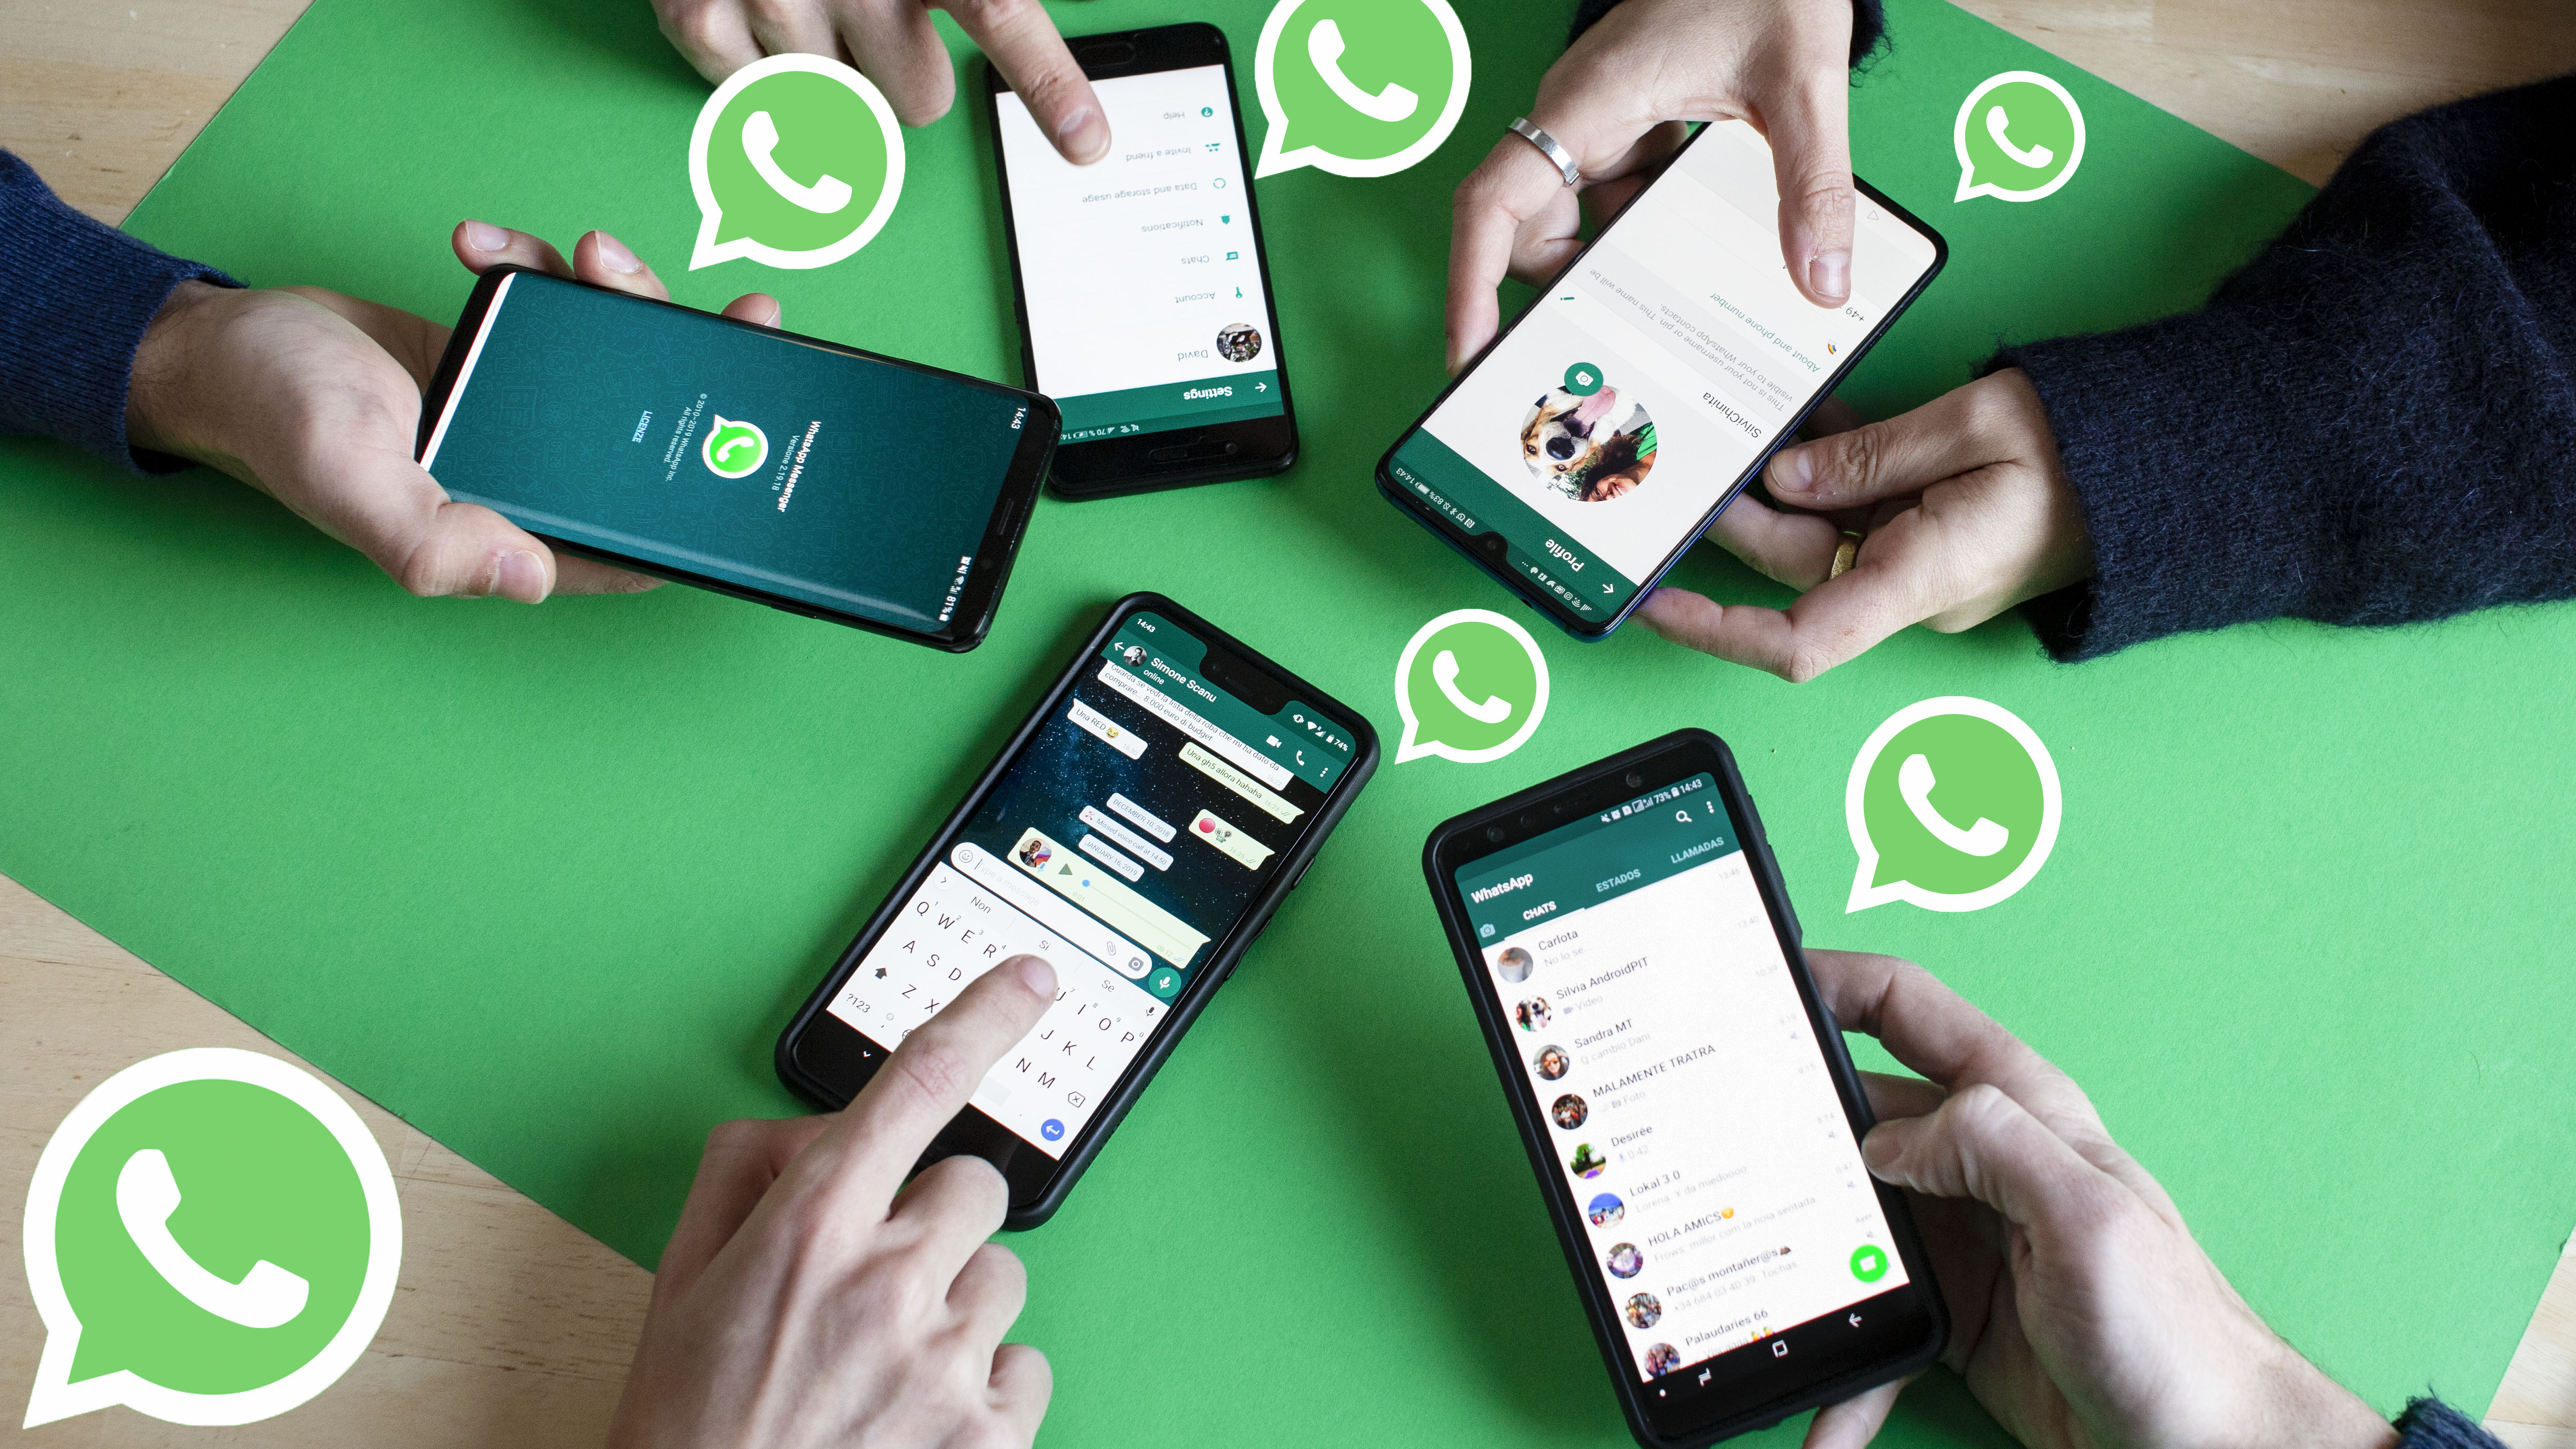 How to send a WhatsApp chat without saving the contact | AndroidPIT